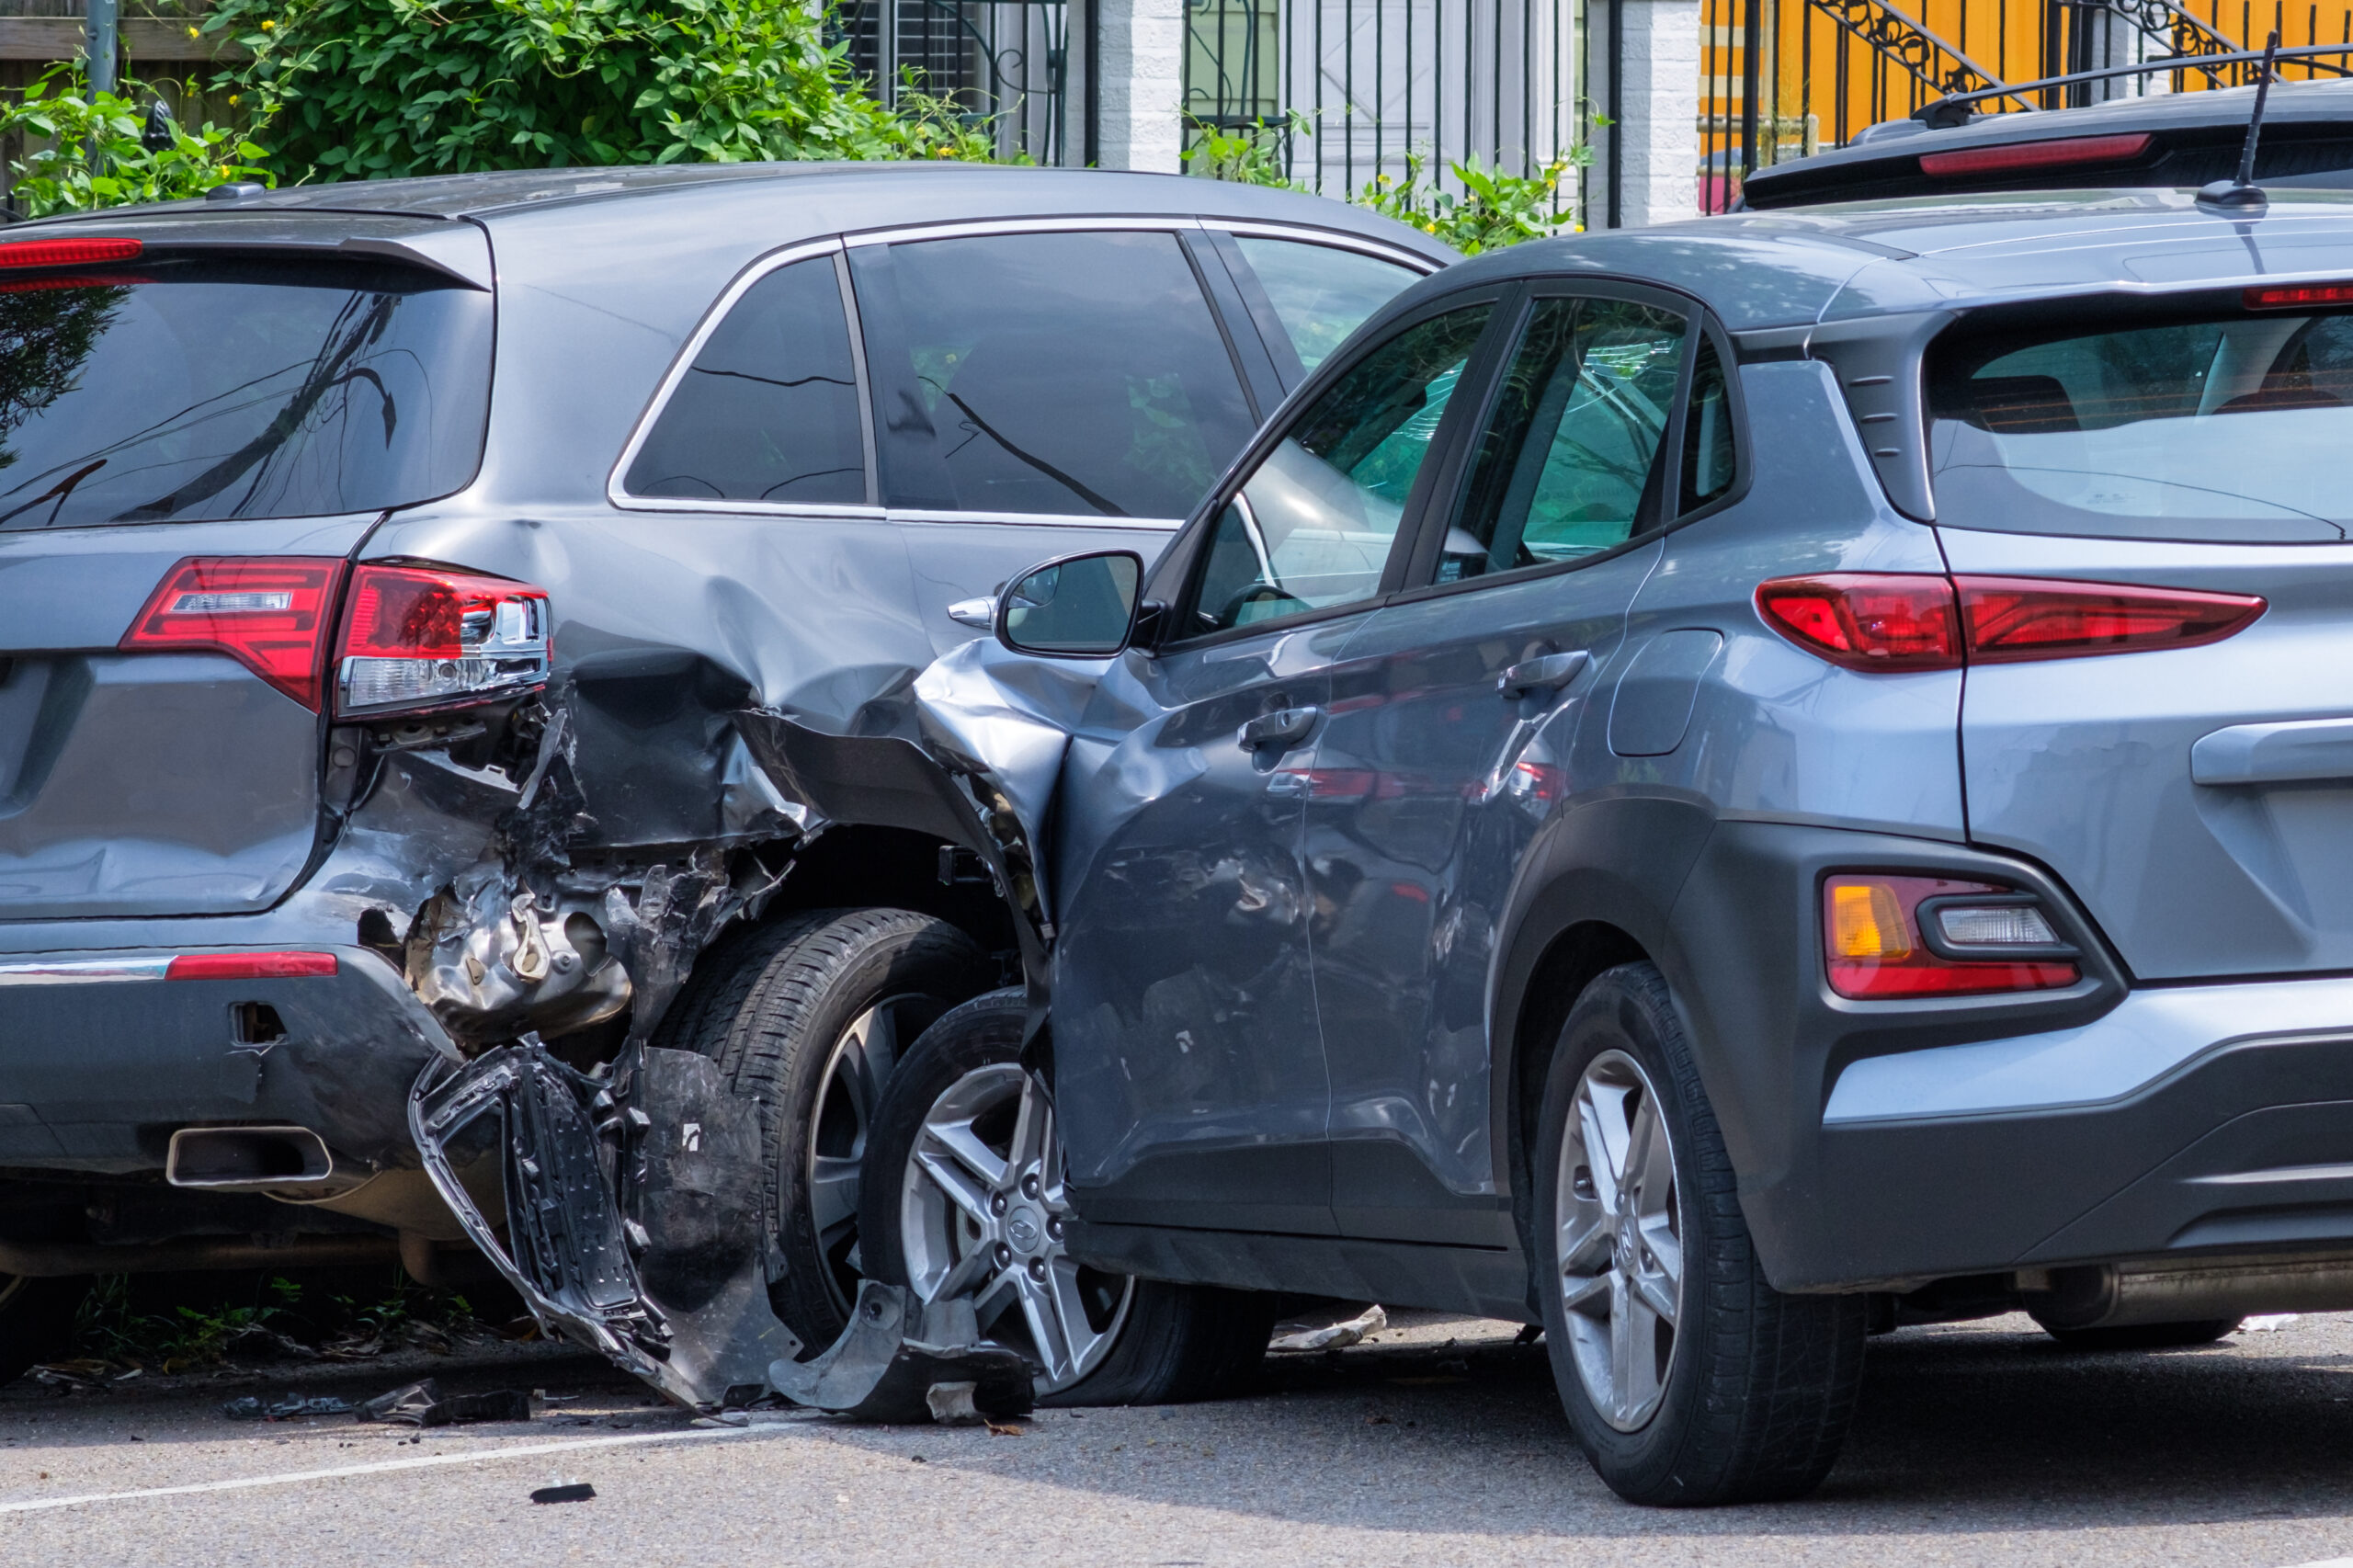 Are Drunk Drivers Automatically at Fault for a Car Accident?